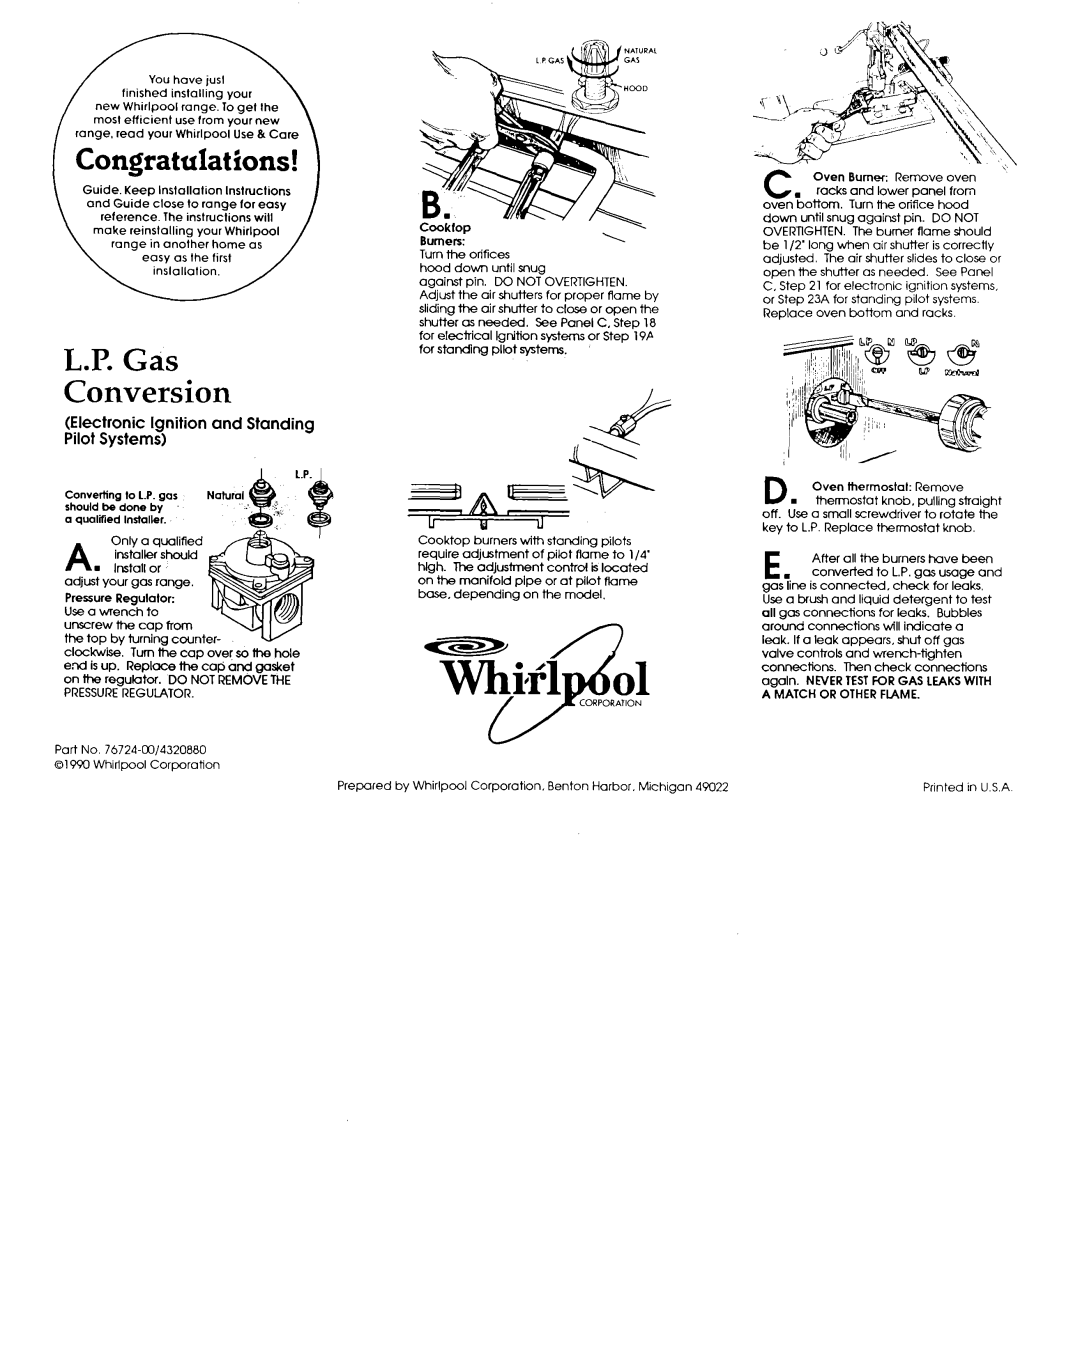 Whirlpool 76724.CO/4320880 Congratulations, LX Gas Conversion, Electronic Ignition and Standing Pilot Systems, TKifl 